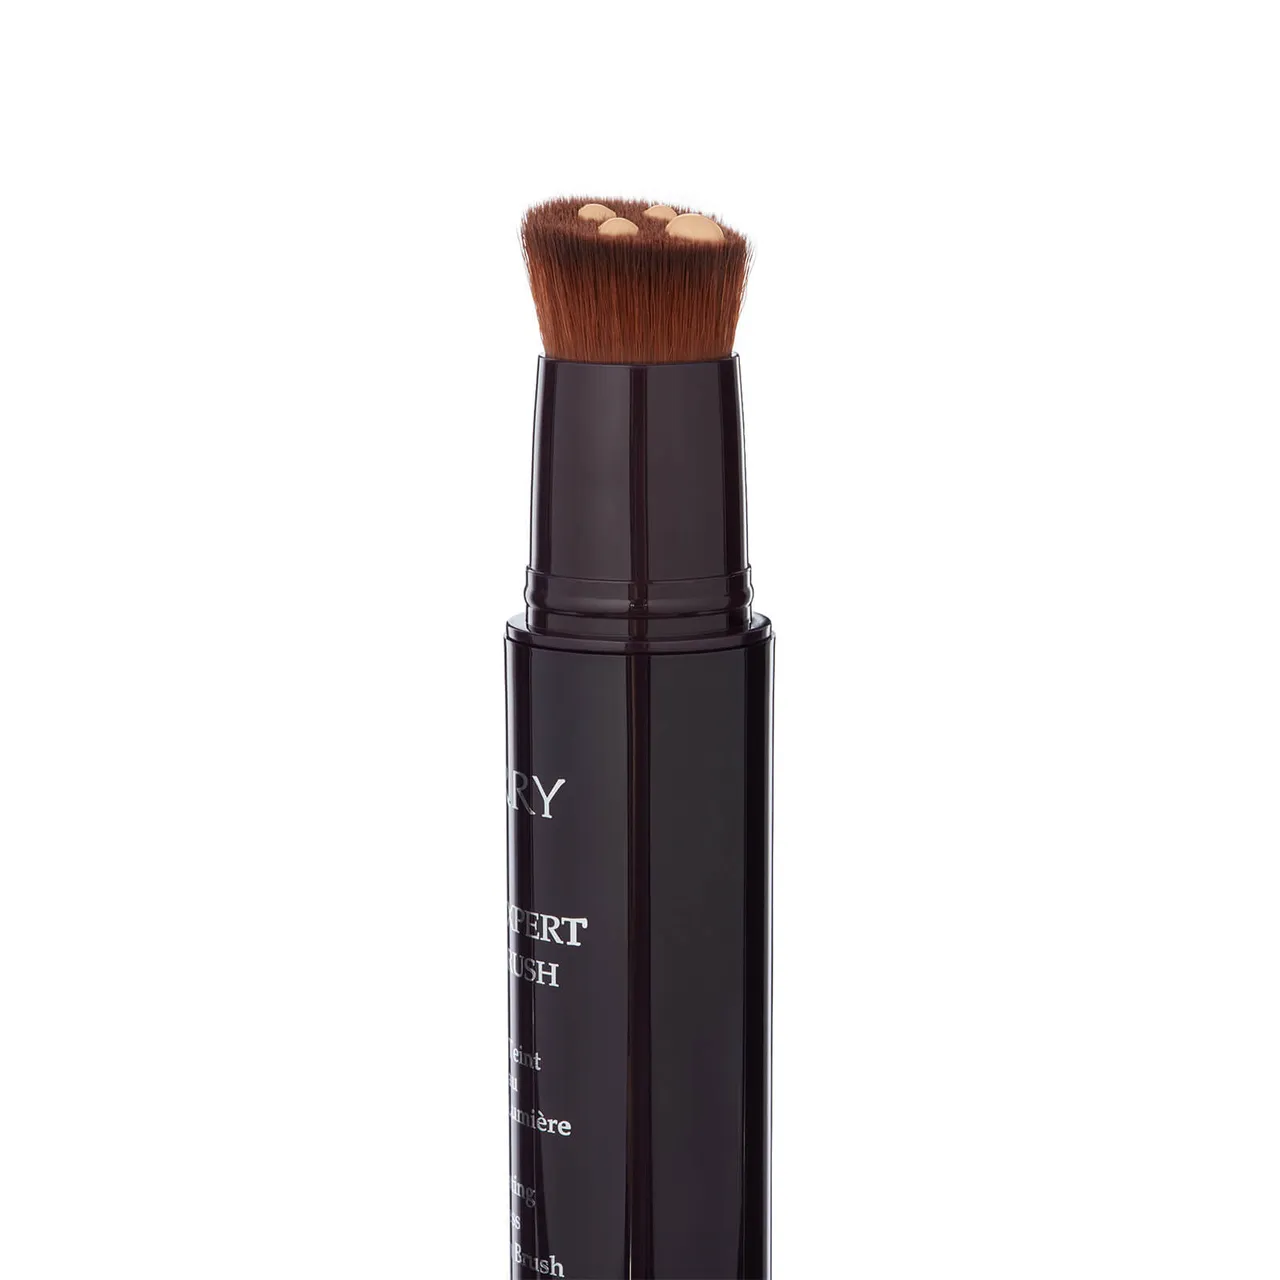 By Terry Light-Expert Click Brush Foundation 19.5ml (Various Shades) - 4.5. Soft Beige